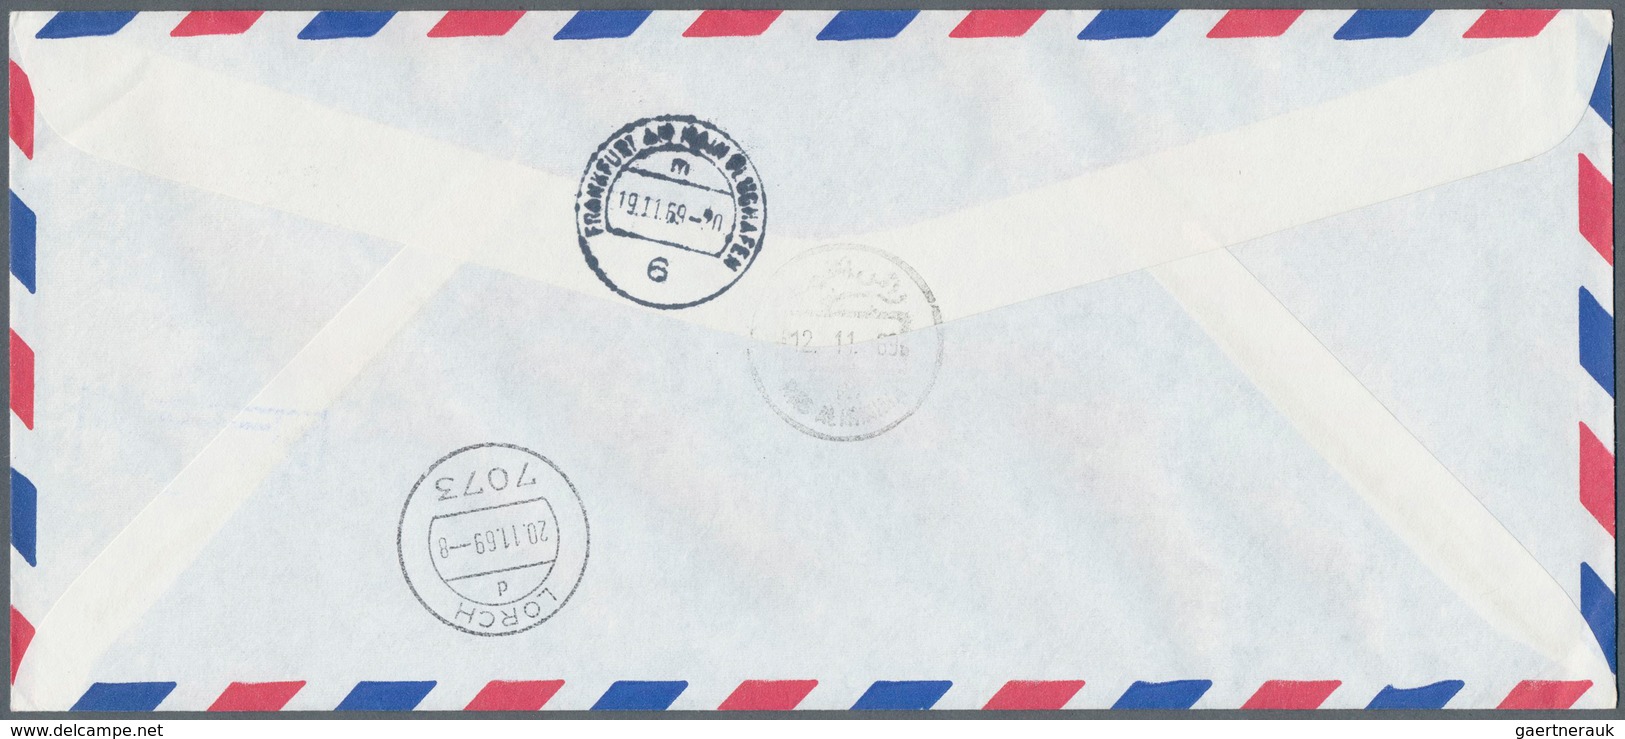 09651 Ras Al Khaima: 1969, Space Research, Four Registered Airmail Covers To USA/Germany With Arrival Mark - Ras Al-Khaimah